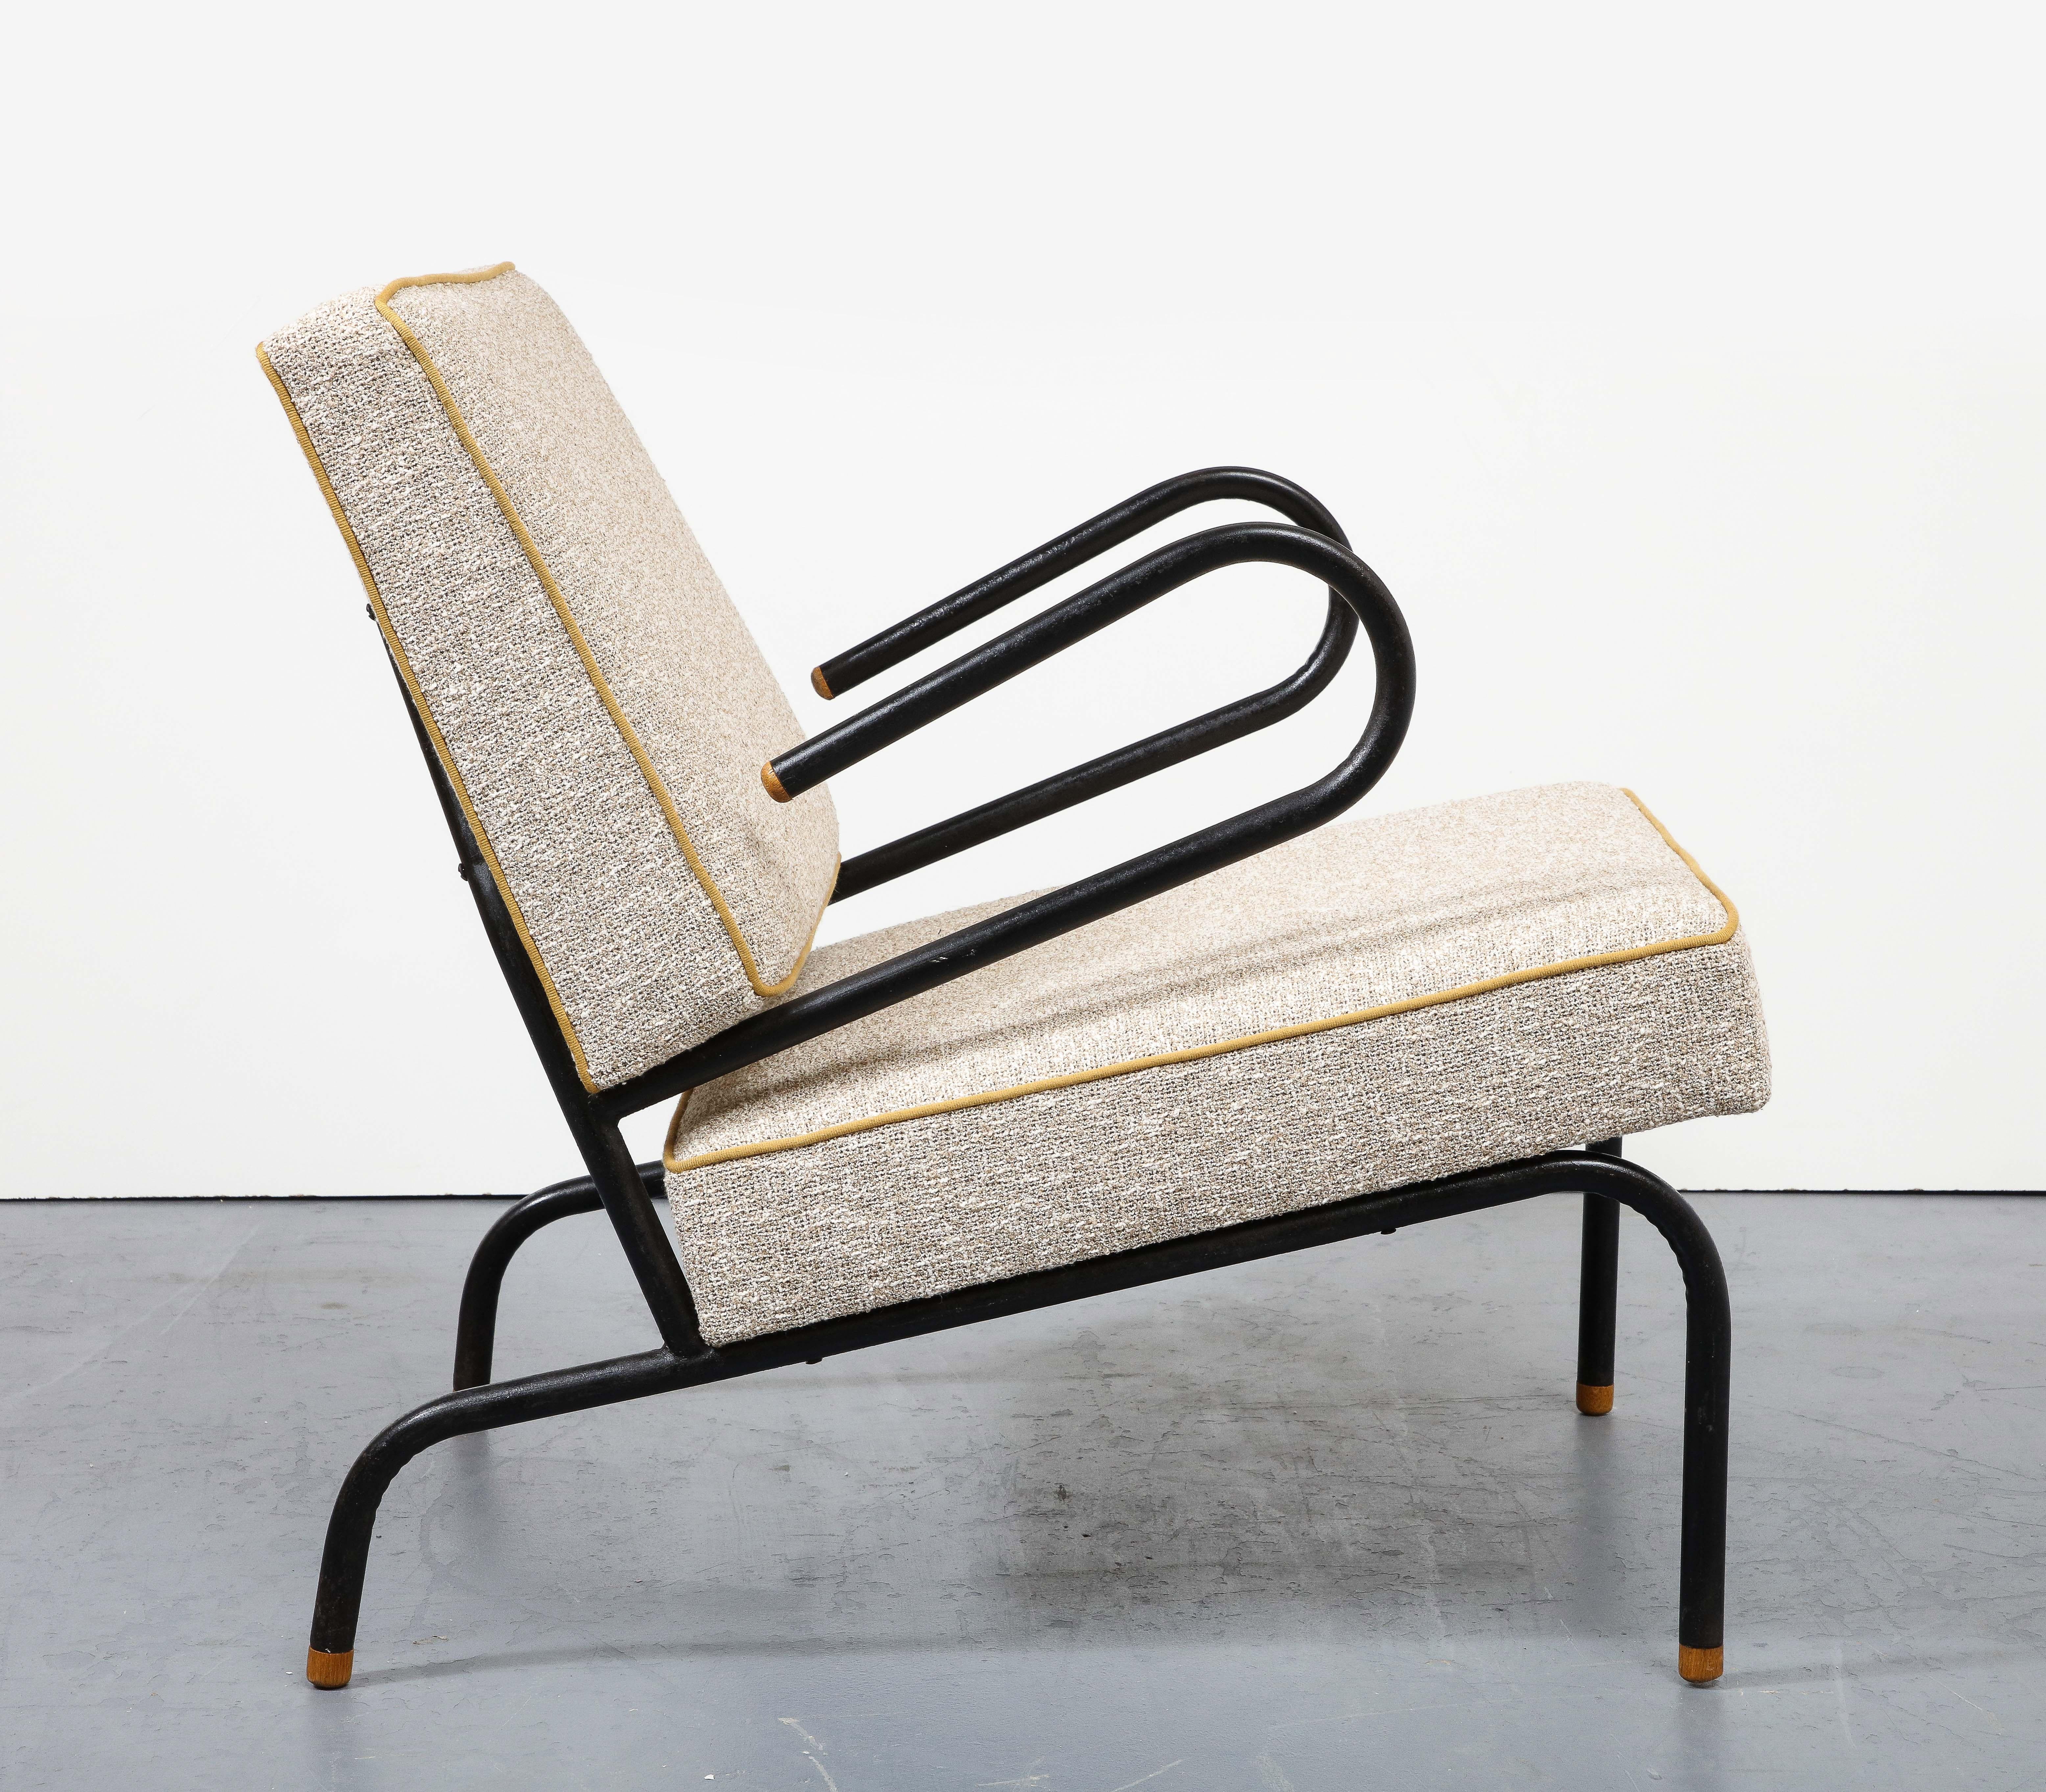 Bent Steel Lounge Chair by Jacques Hitier for Tubauto, France, c. 1955 For Sale 7